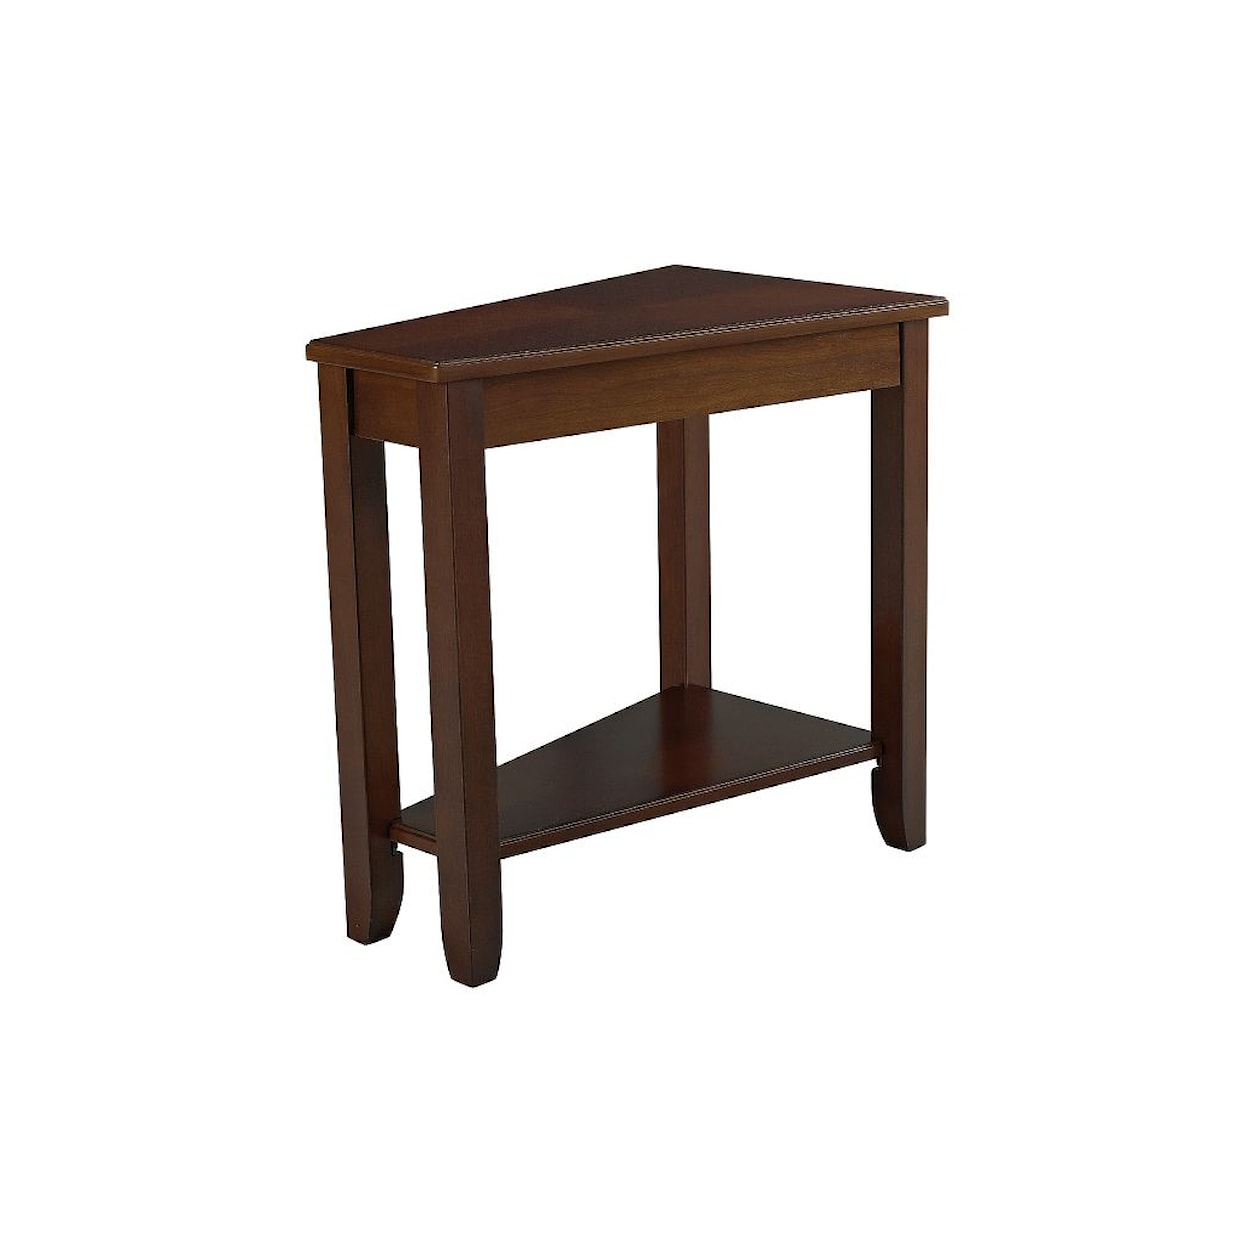 Hammary Chairsides Cherry Chairside Table